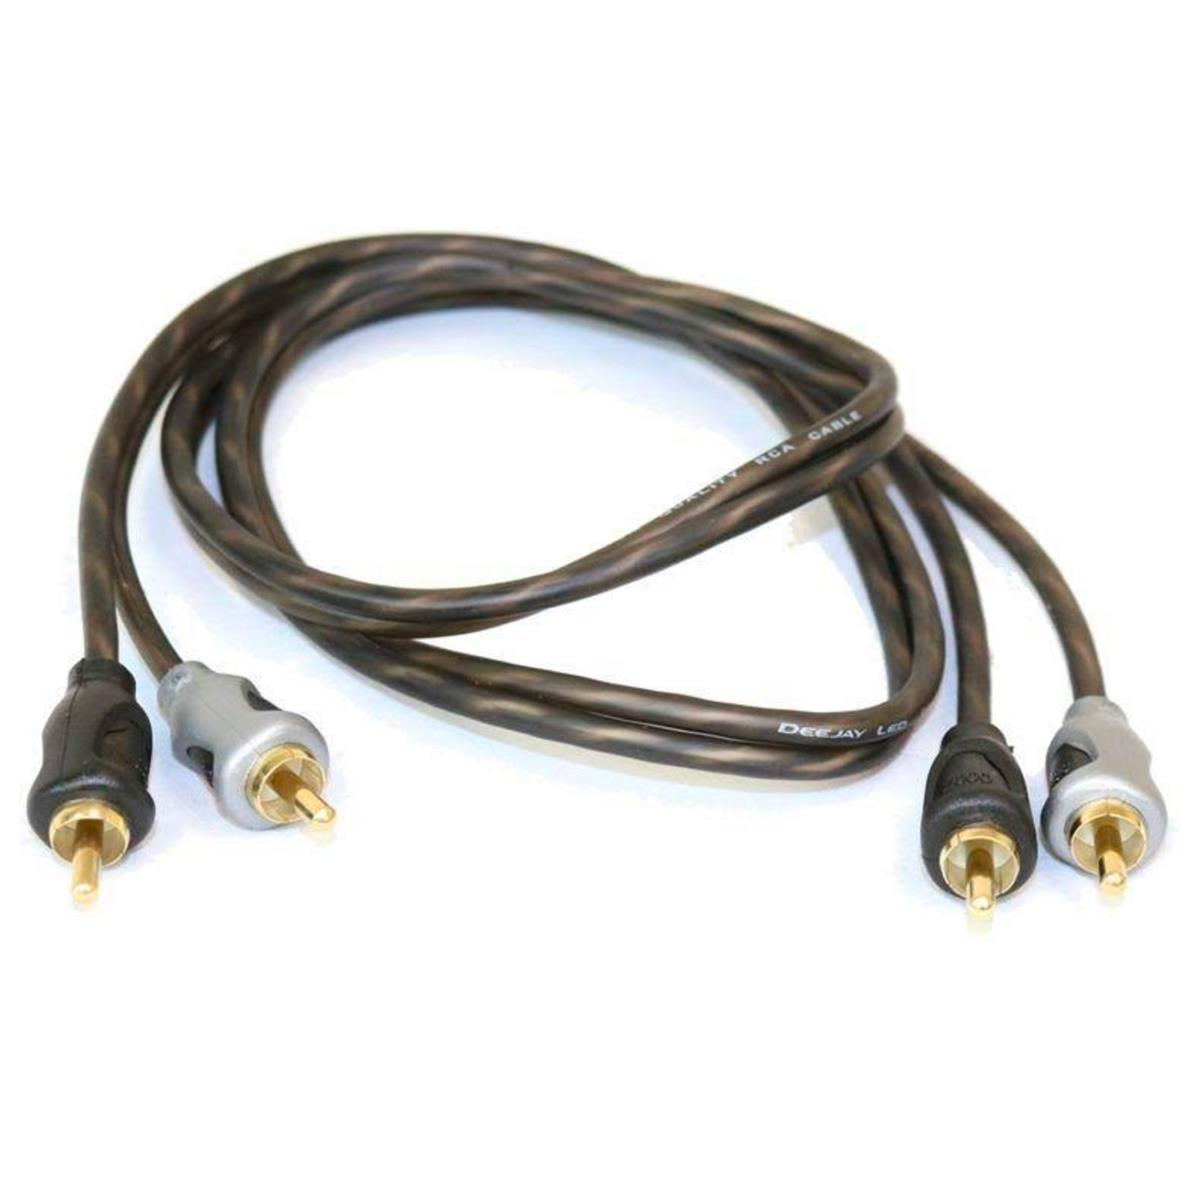 Image of Deejay LED 3' RCA to RCA Copper Audio Cable